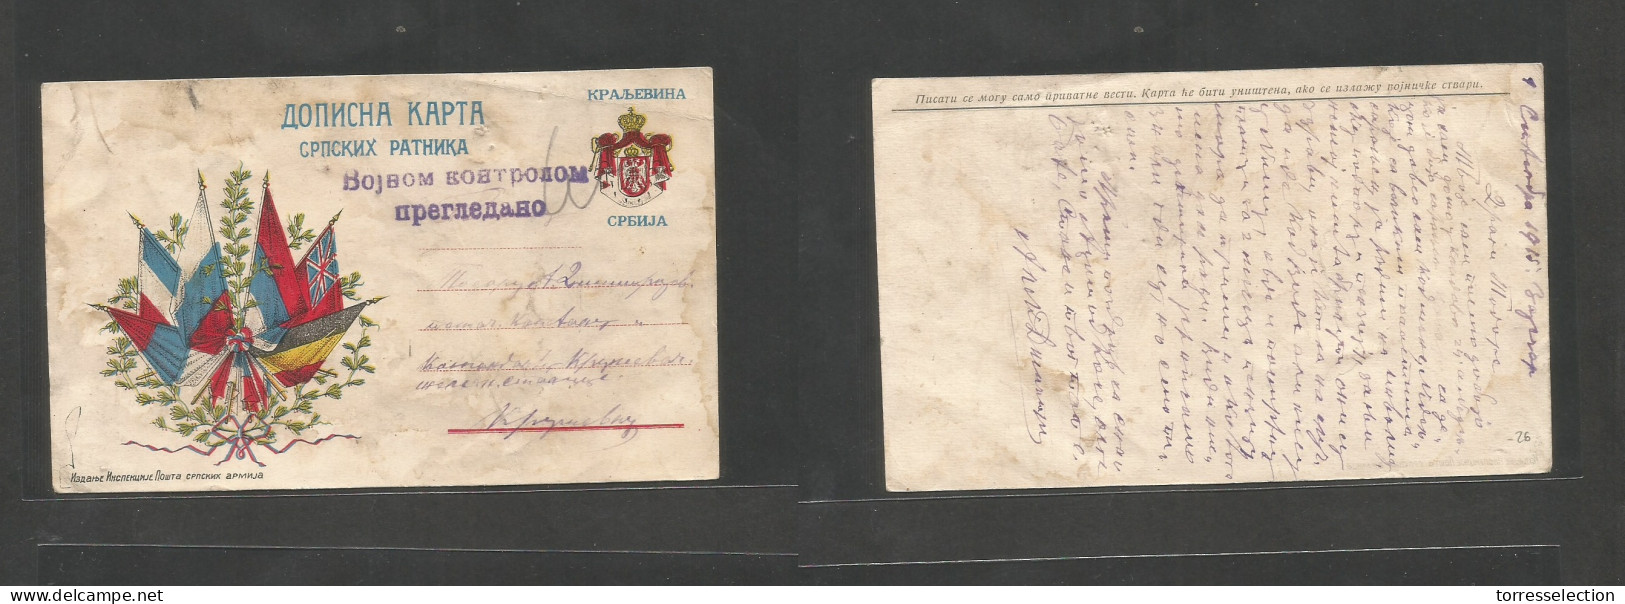 MILITARY MAIL. 1915 (1 Oct) Bagerap - Kleracby. Military FM Color Flags Card. Neat Censor Cachet With Text. Fine. - Militaire Post (PM)